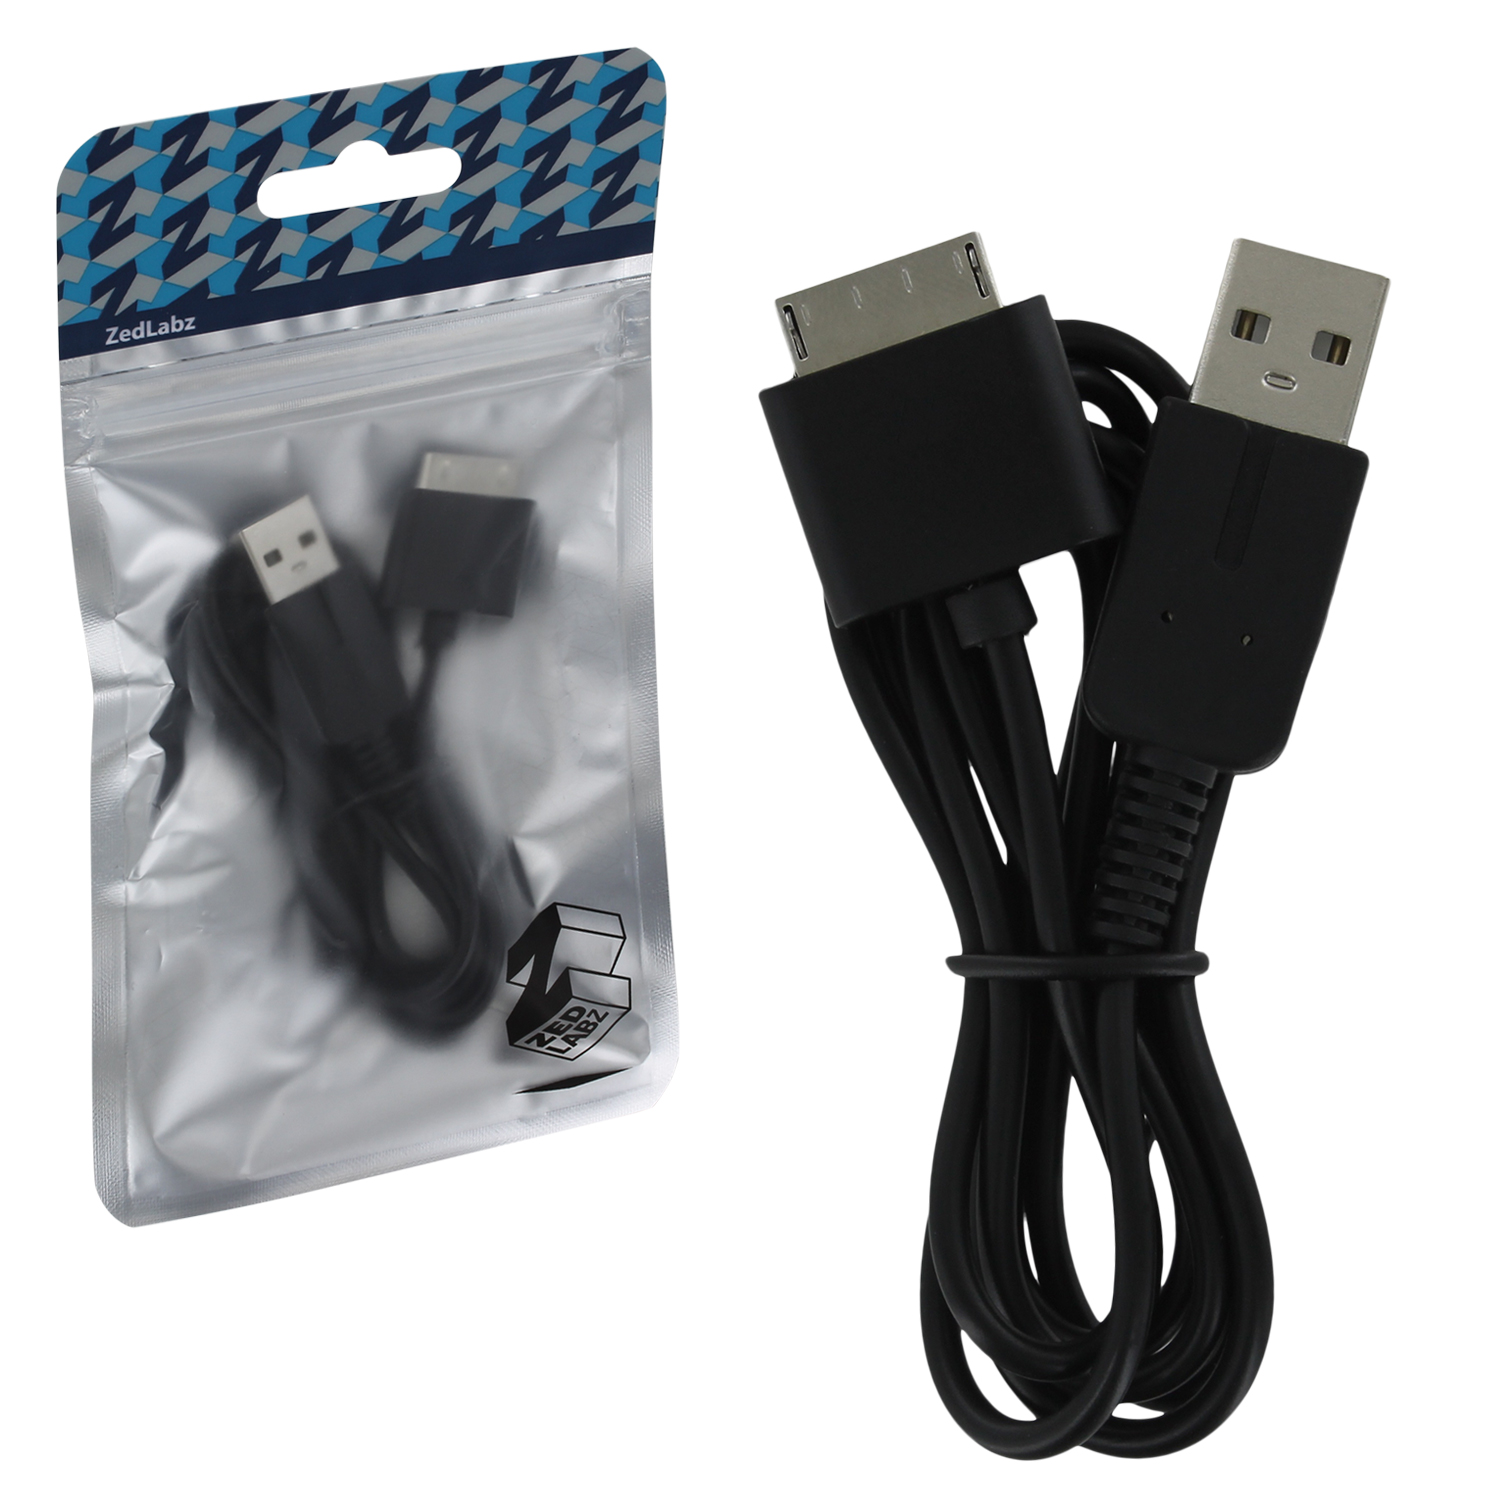 HDE Data and Power Cable for PSP Go Portable System 2-in-1 USB 2.0 Data Sync Transfer and Power Charger Cable for Sony PSP Go Consoles 2 Pack 